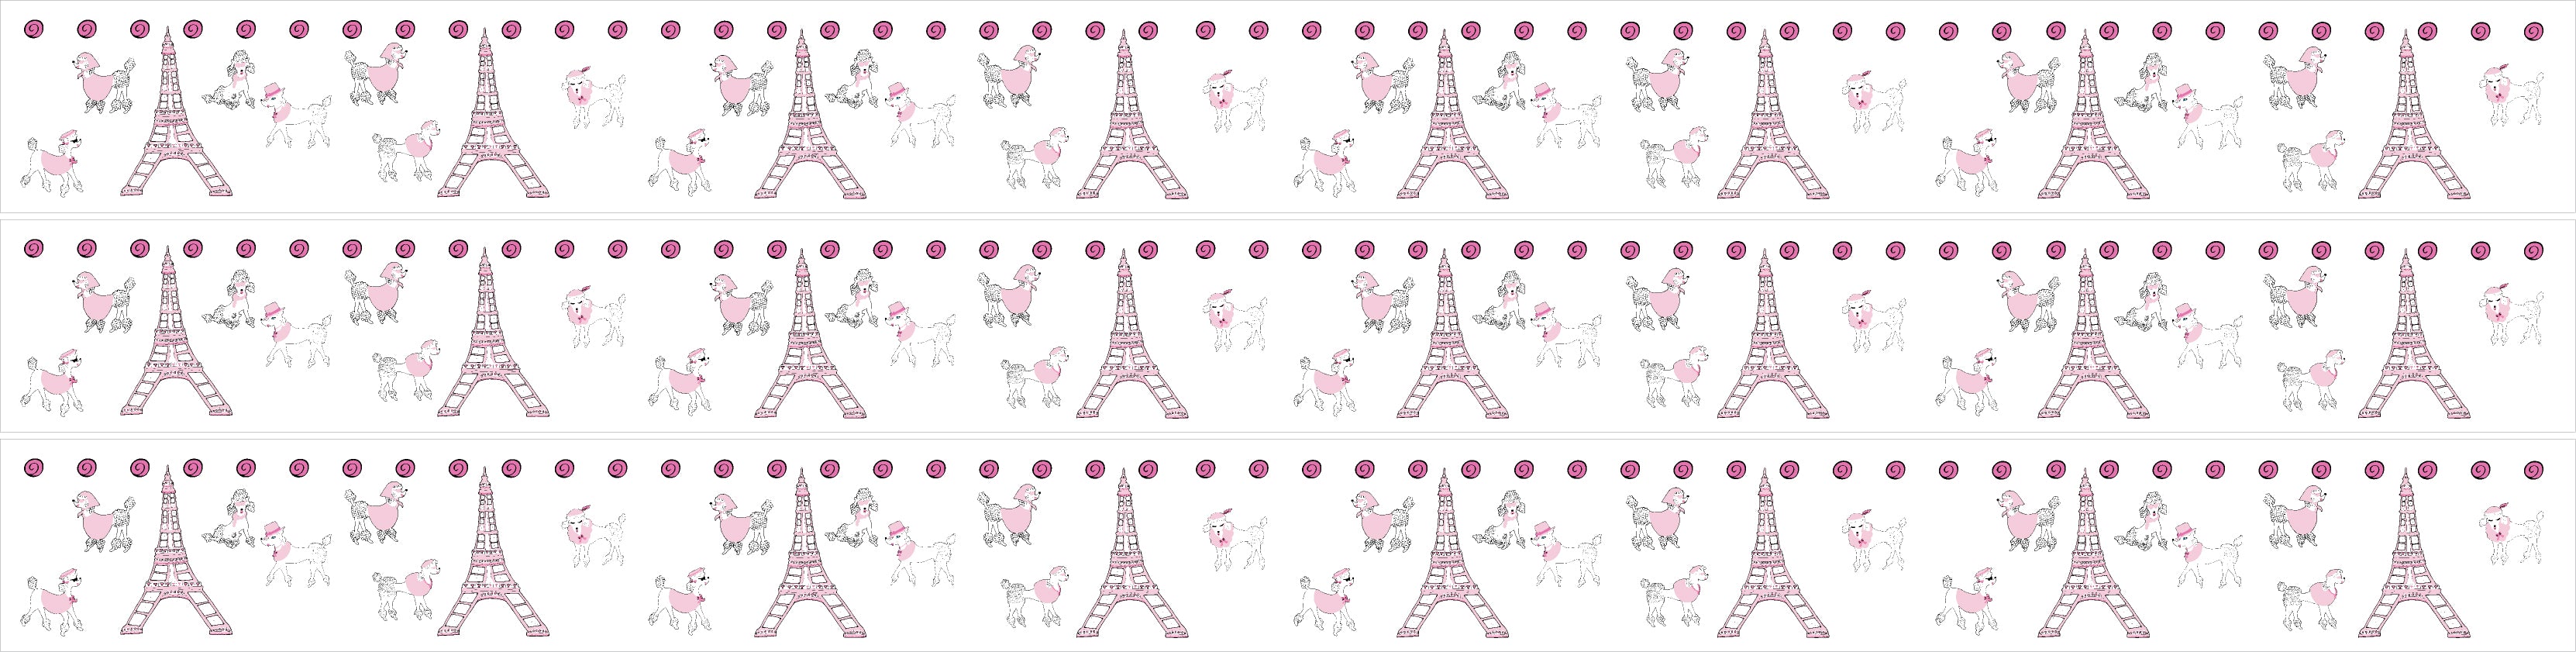 Poodles in Paris Wall Border Wall Decals 4.5 inch Wide x 13 Feet Long